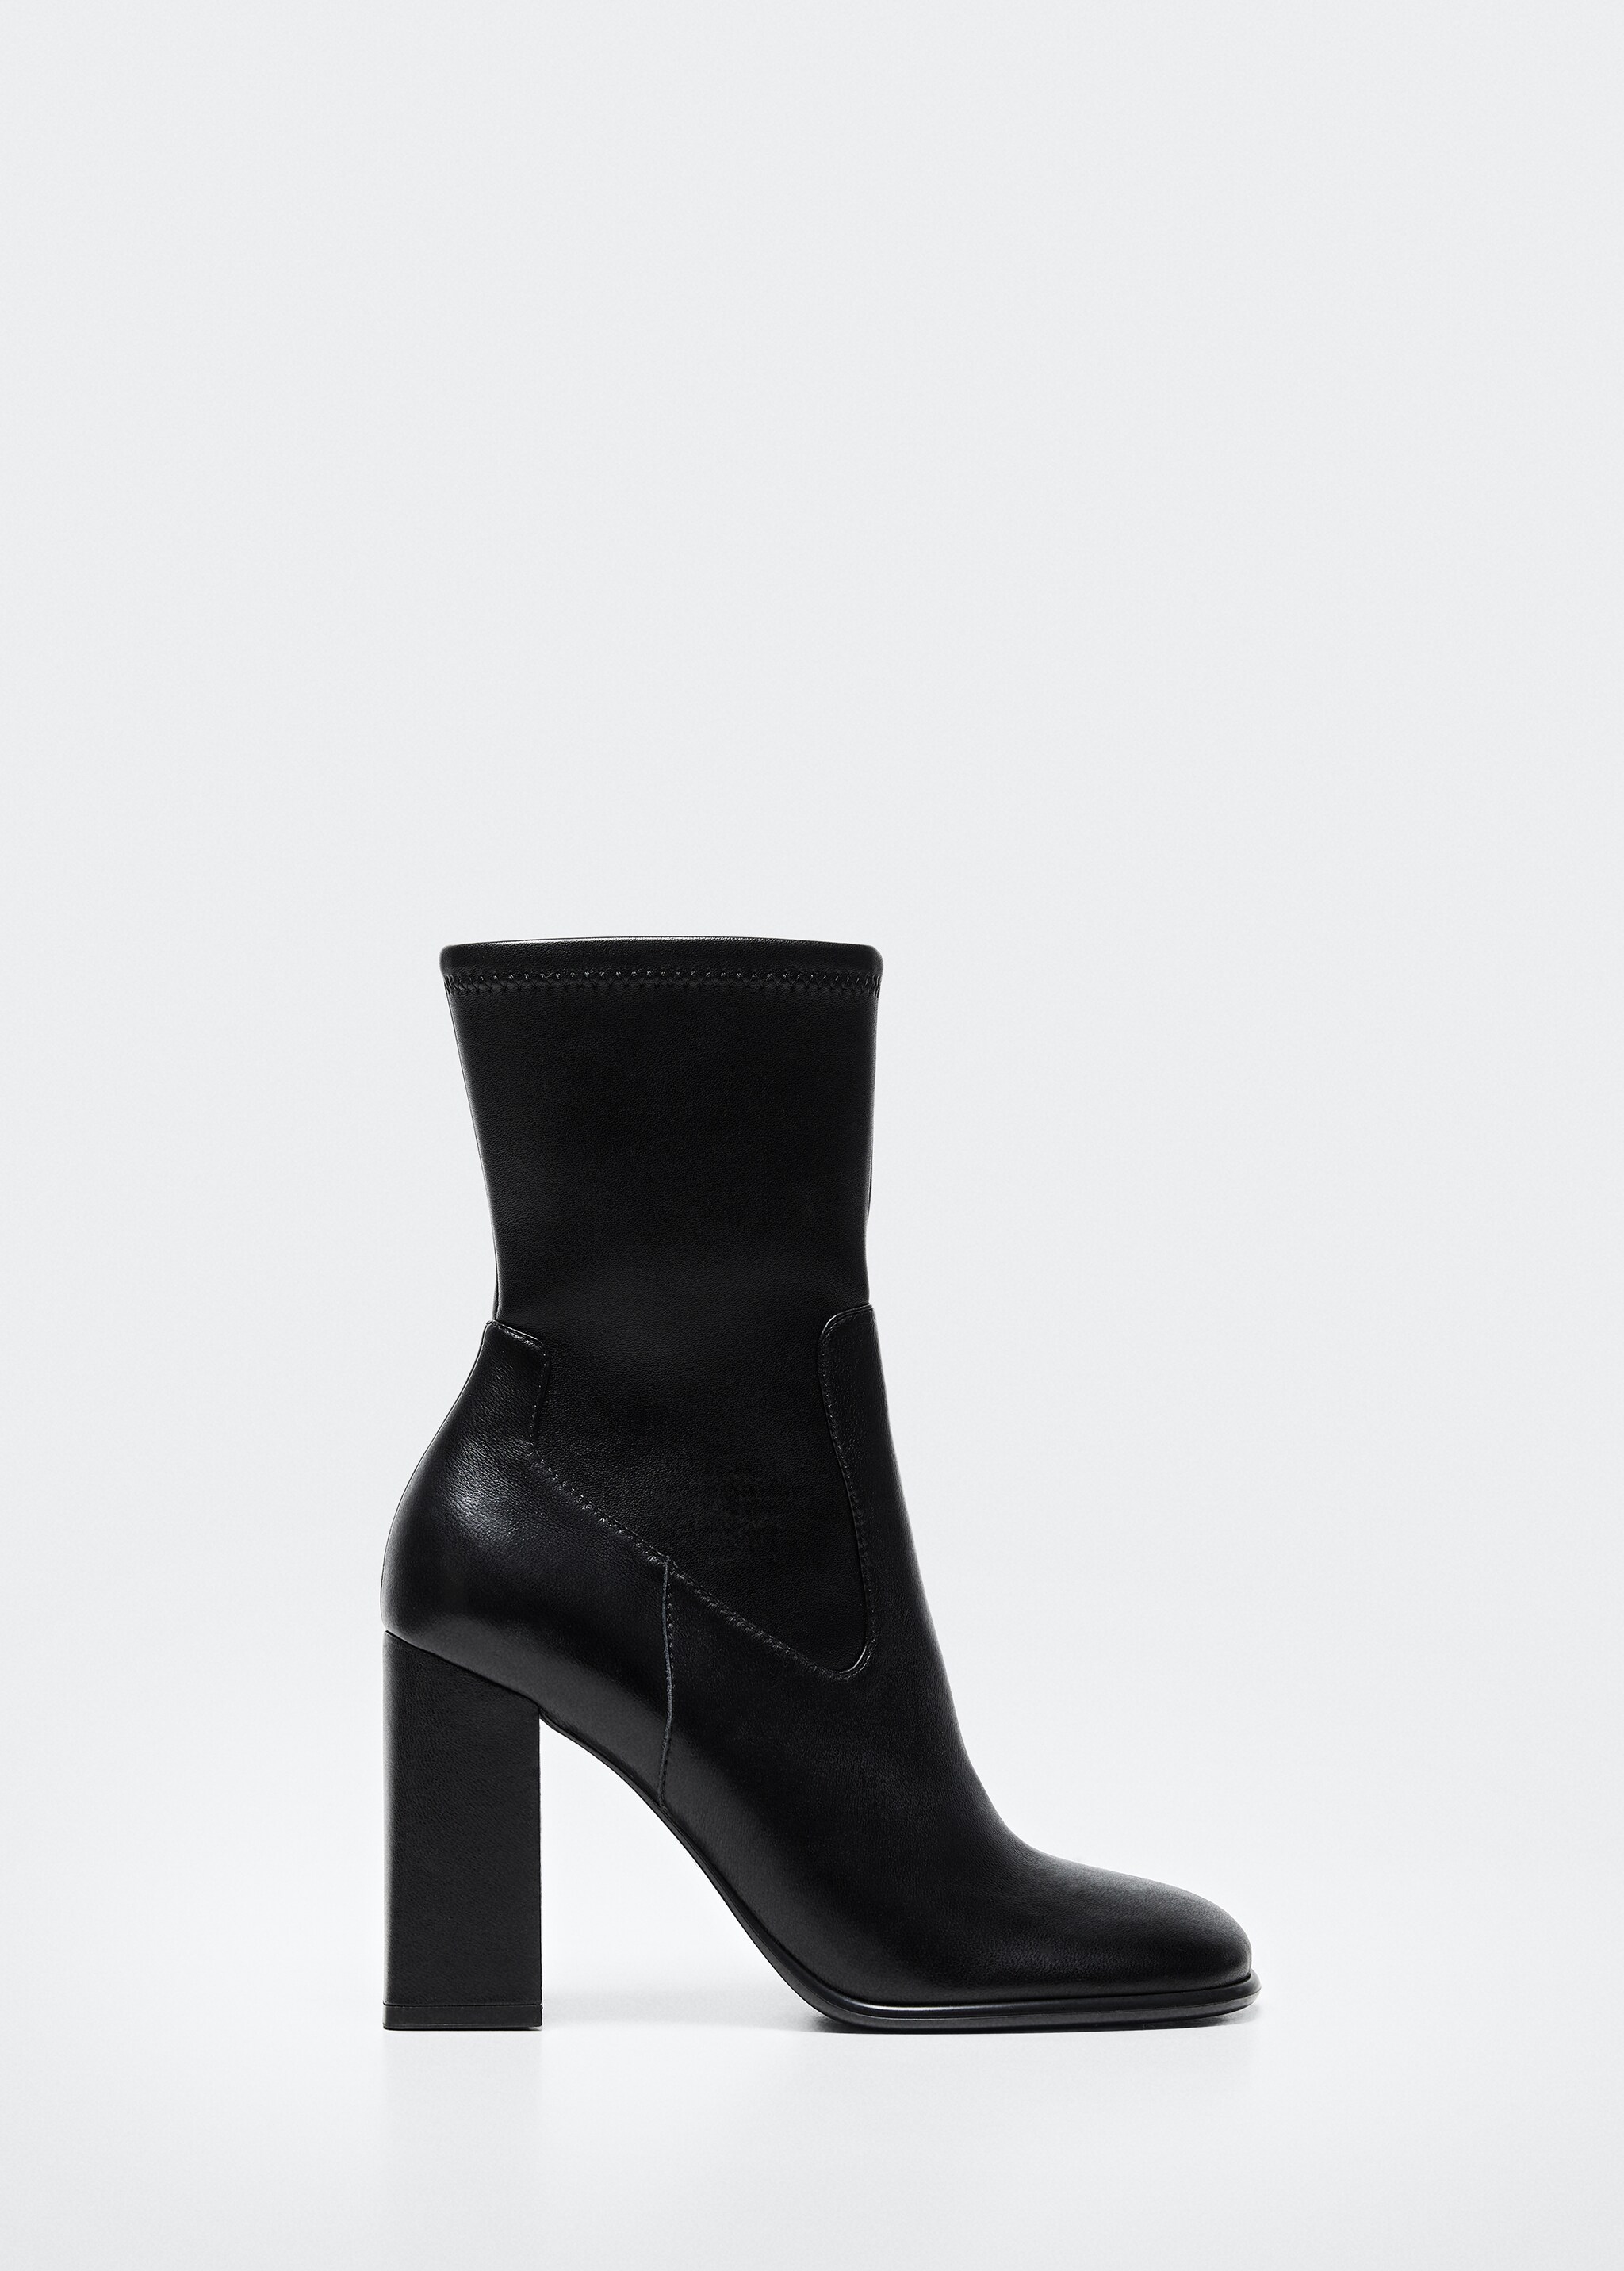 Squared toe leather ankle boots - Article without model